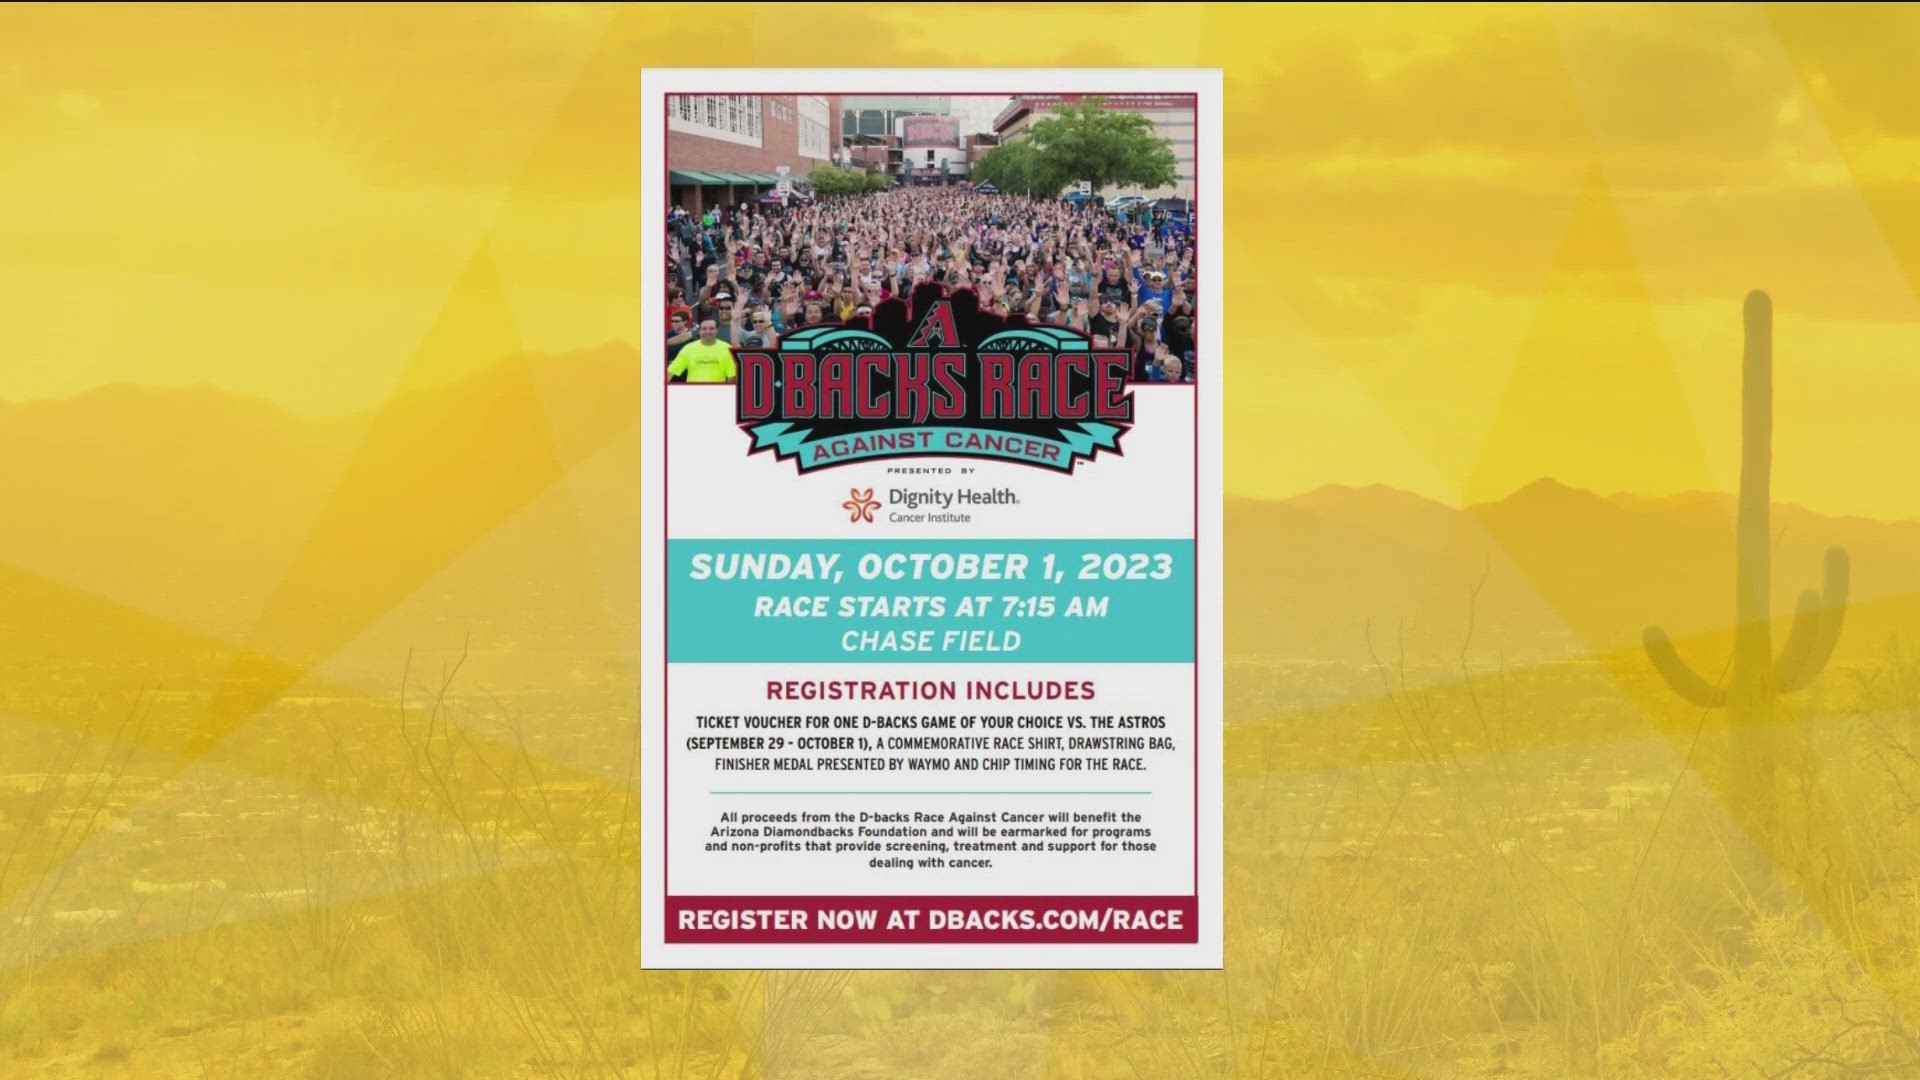 D-backs Race Against Cancer has raised over a million dollars which benefits local charities. They continue the support with another race on October 1st this year.